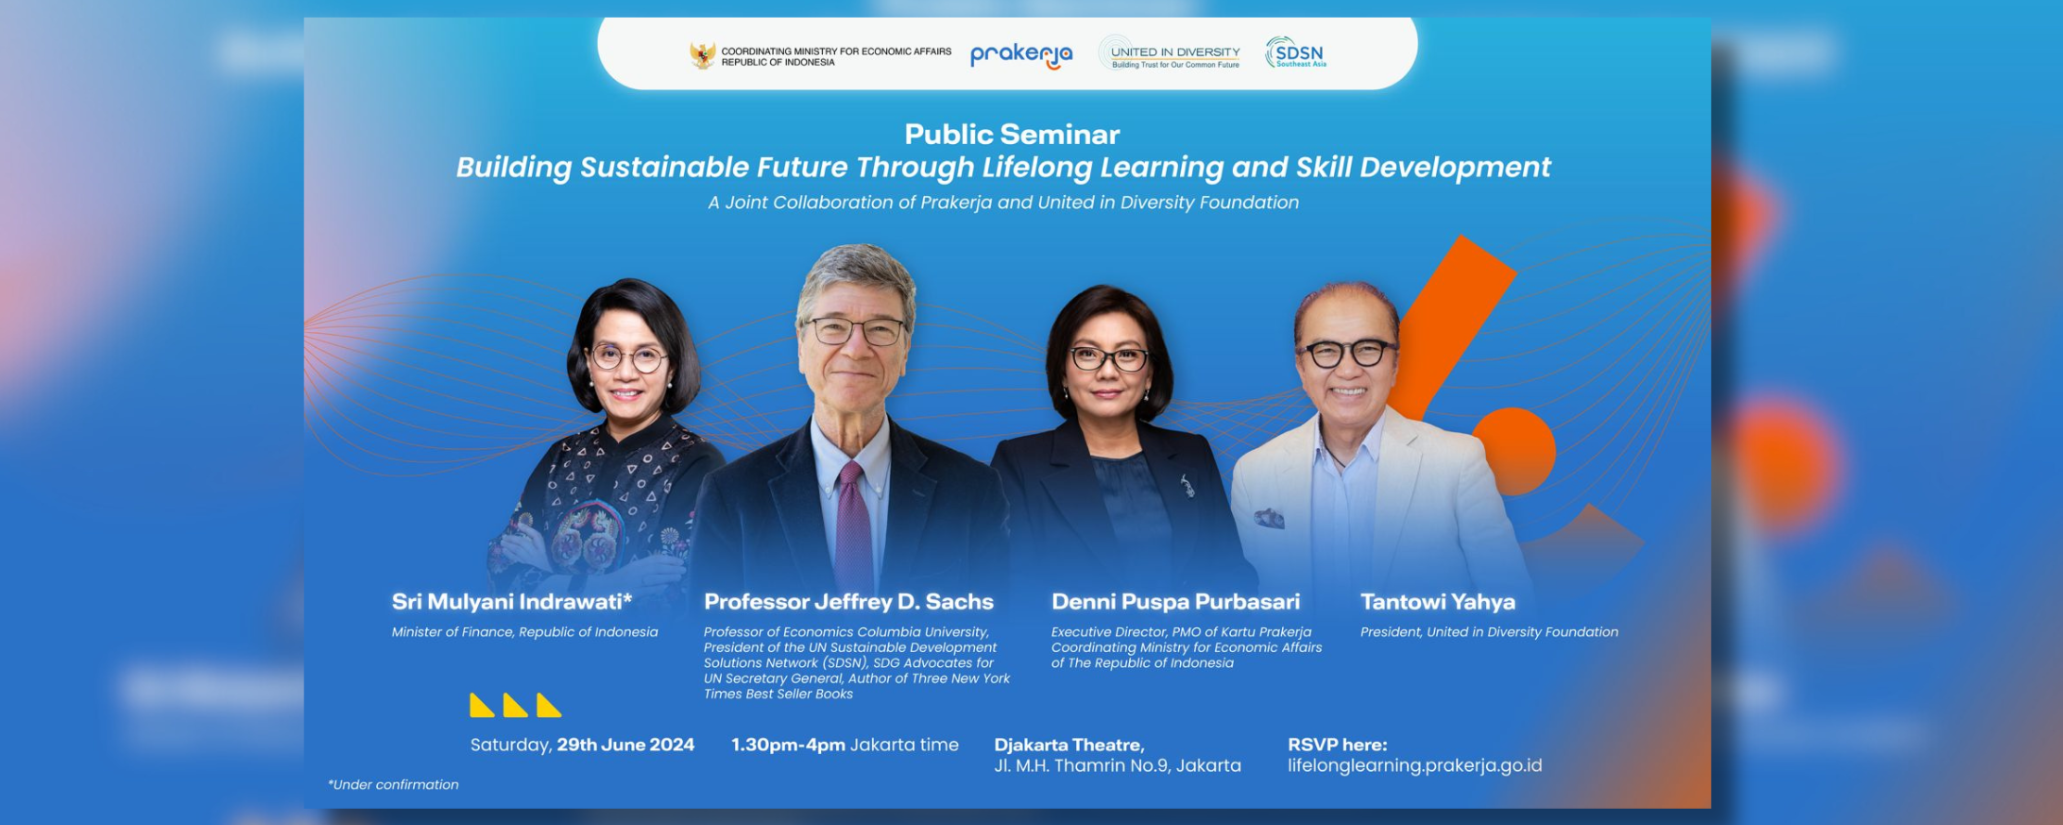 Public Seminar: Building Sustainable Future Through Lifelong Learning and Skill Development